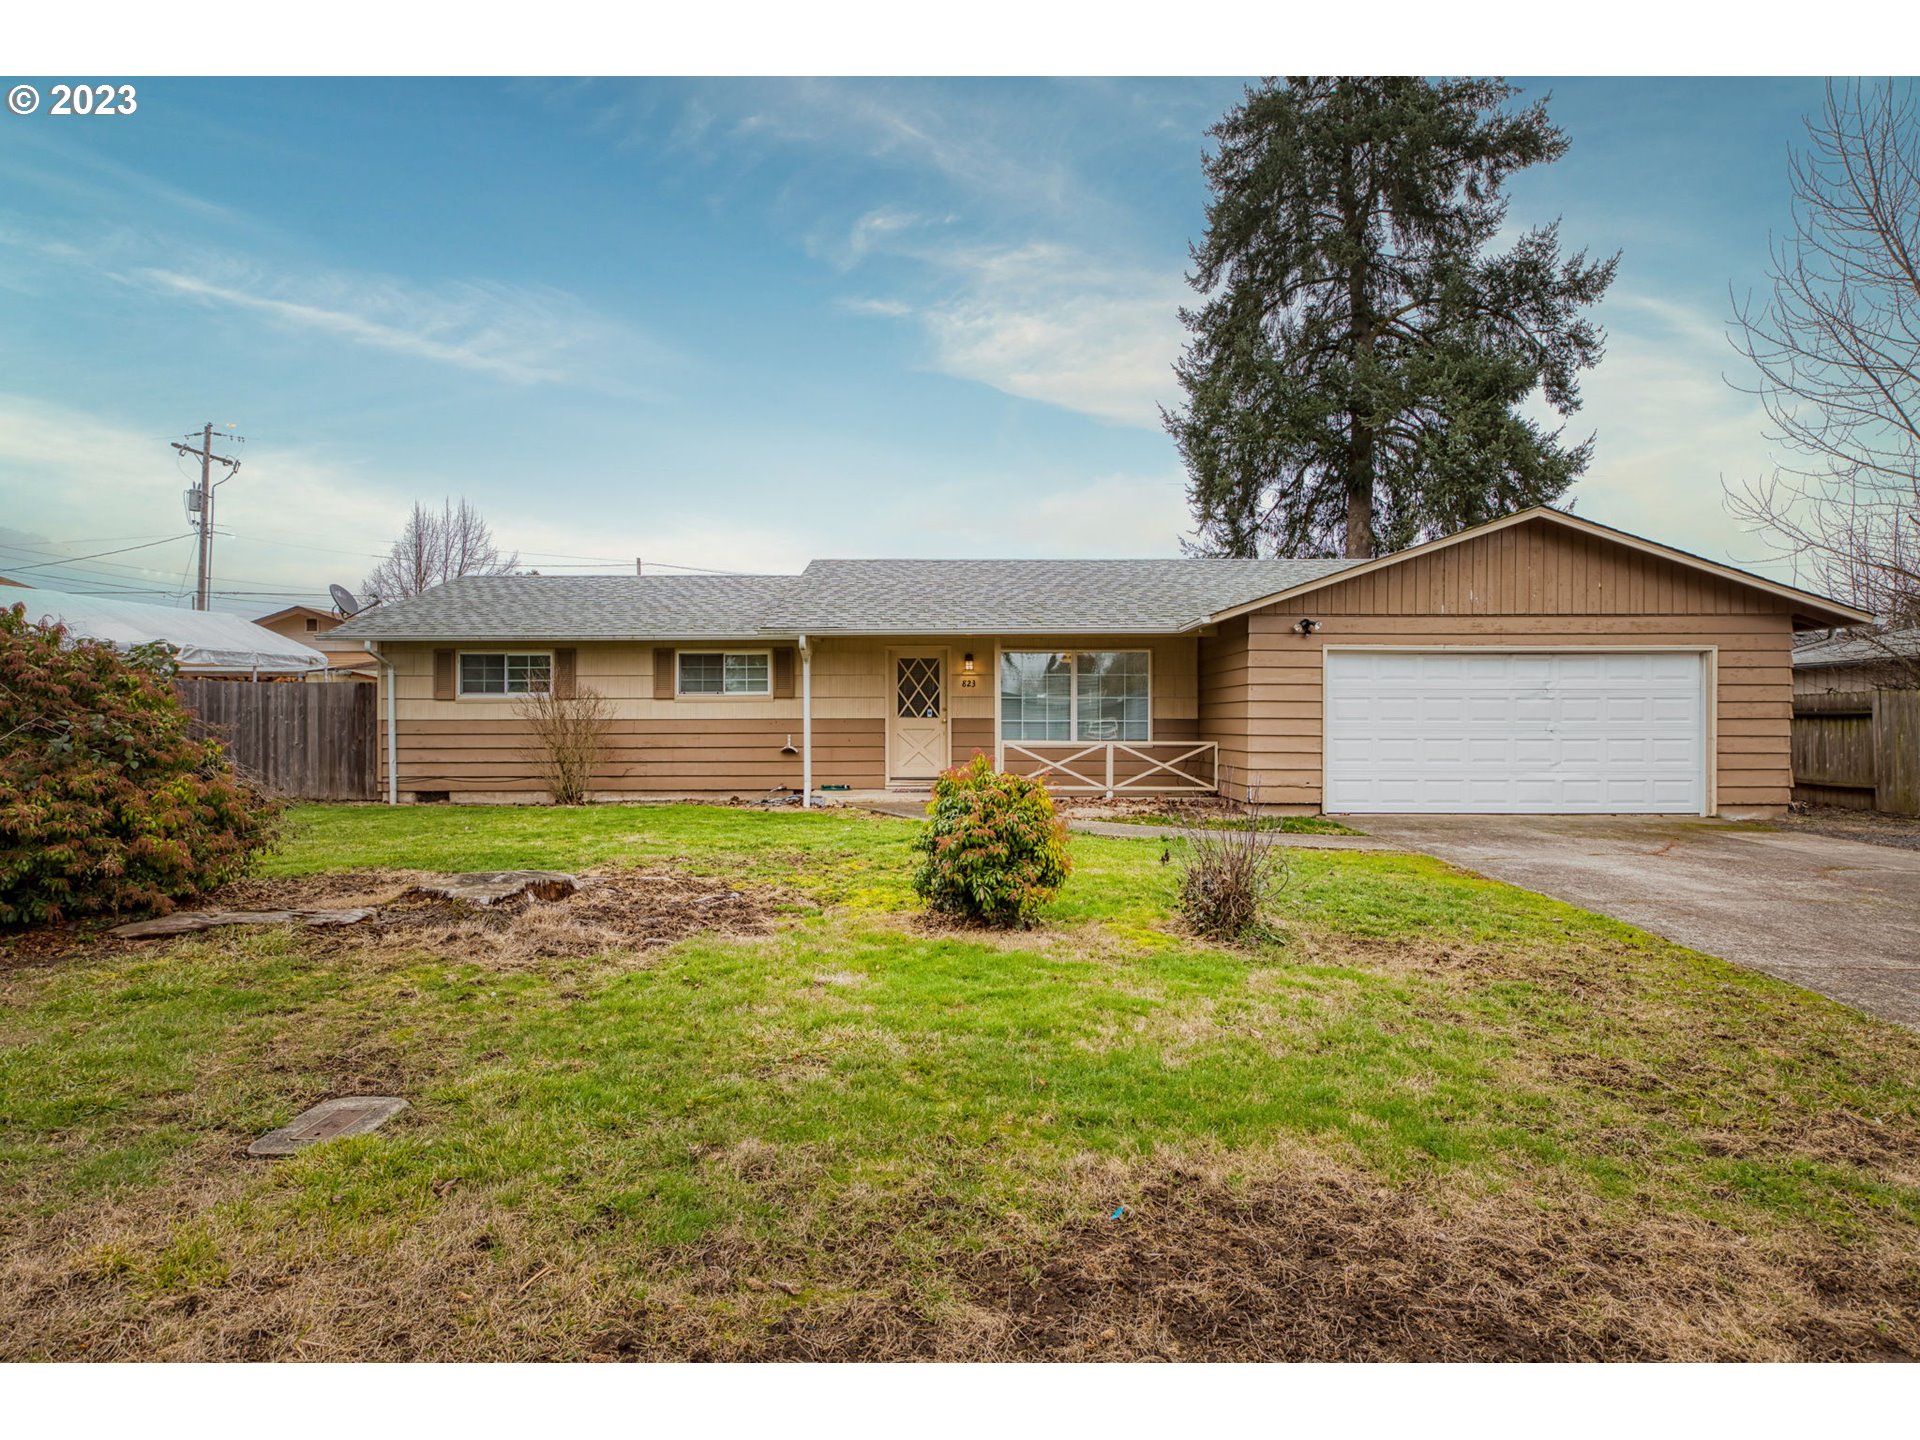 823 S 38TH ST, Springfield, OR 97478